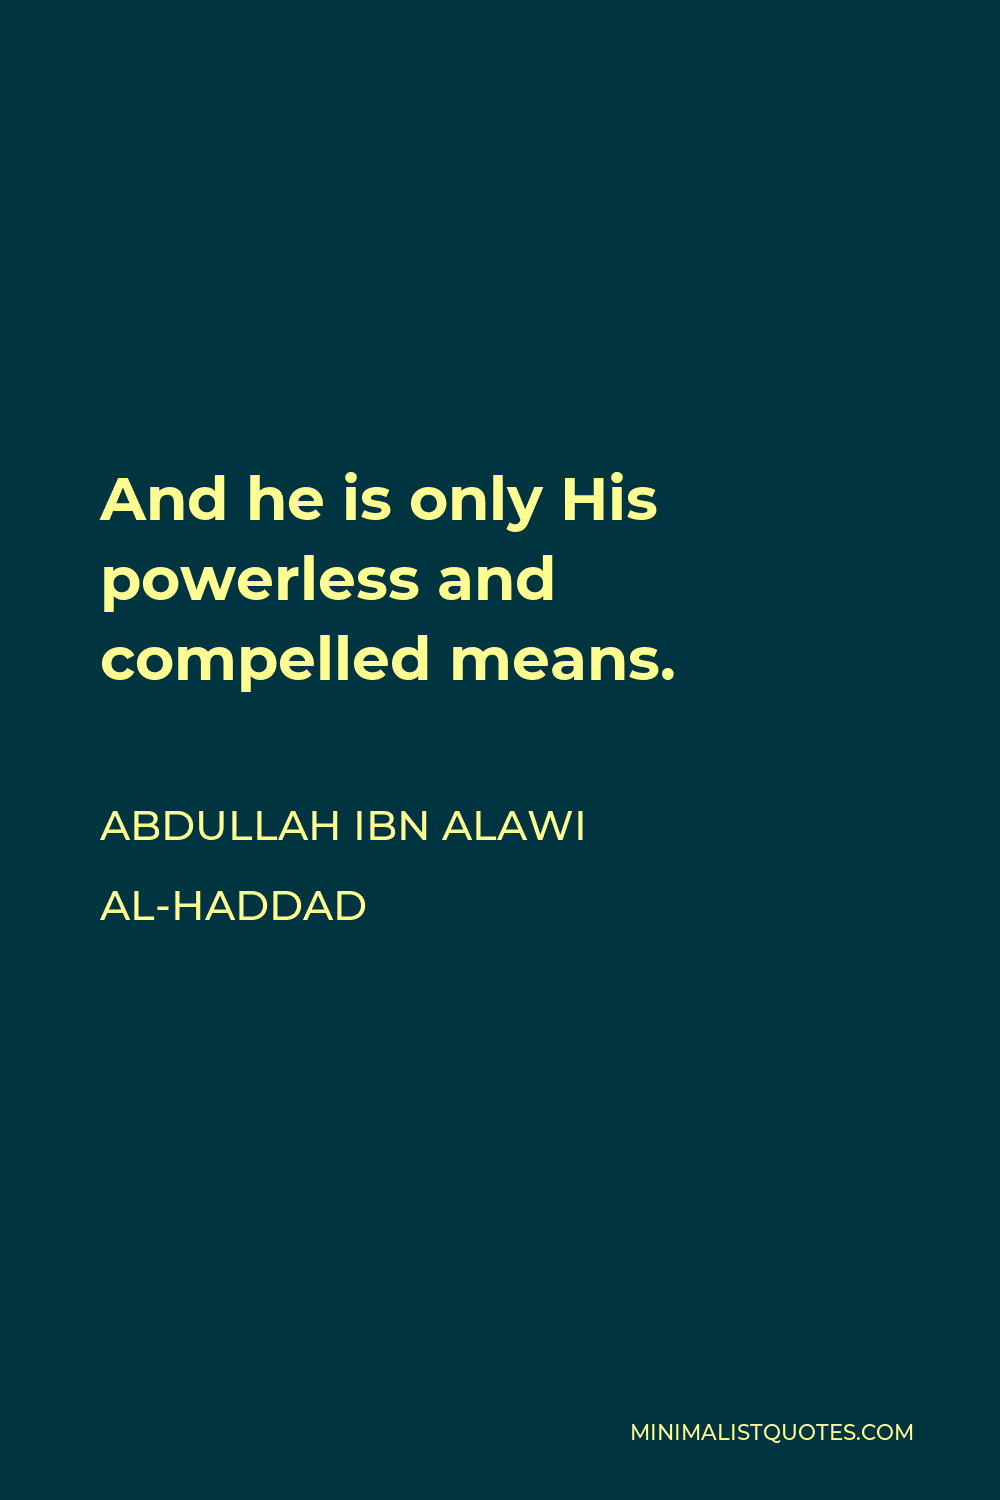 Abdullah ibn Alawi al-Haddad Quote - And he is only His powerless and compelled means.